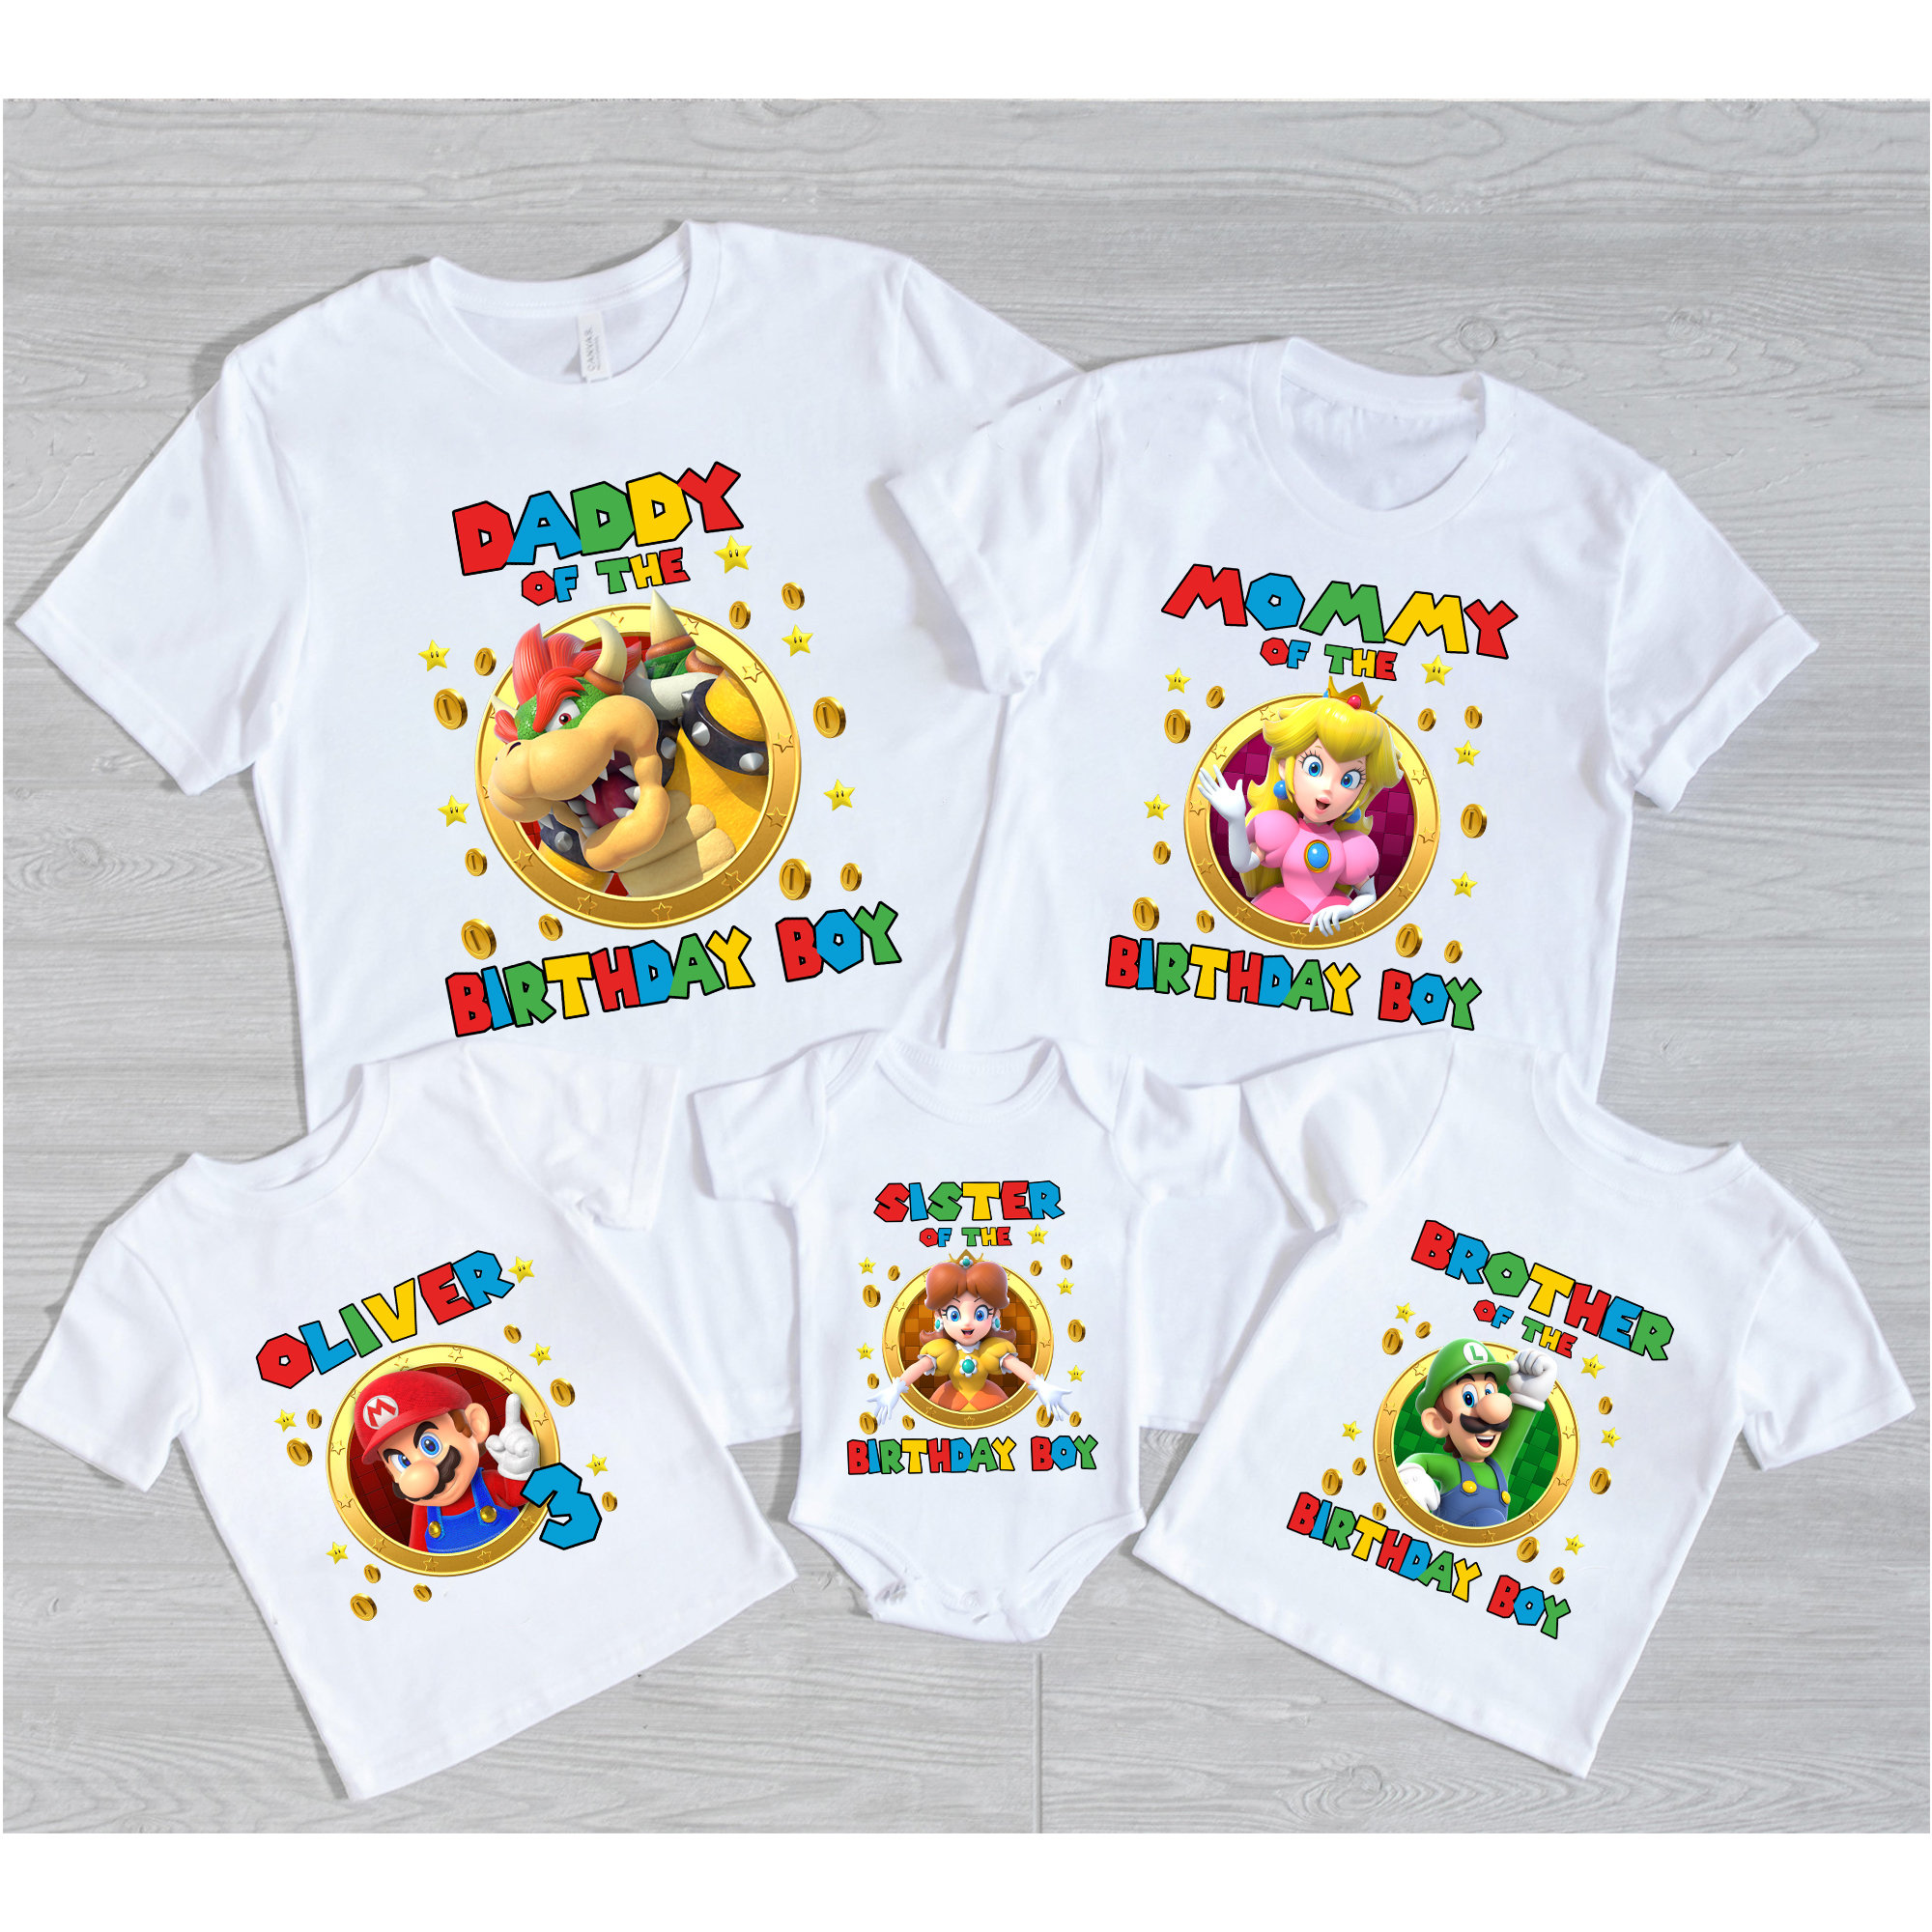 Personalised Super Mario Birthday shirts, Super Family shirt, DadMom Birthday shirt, Kids birthday shirts, Best Gifts for Birthday